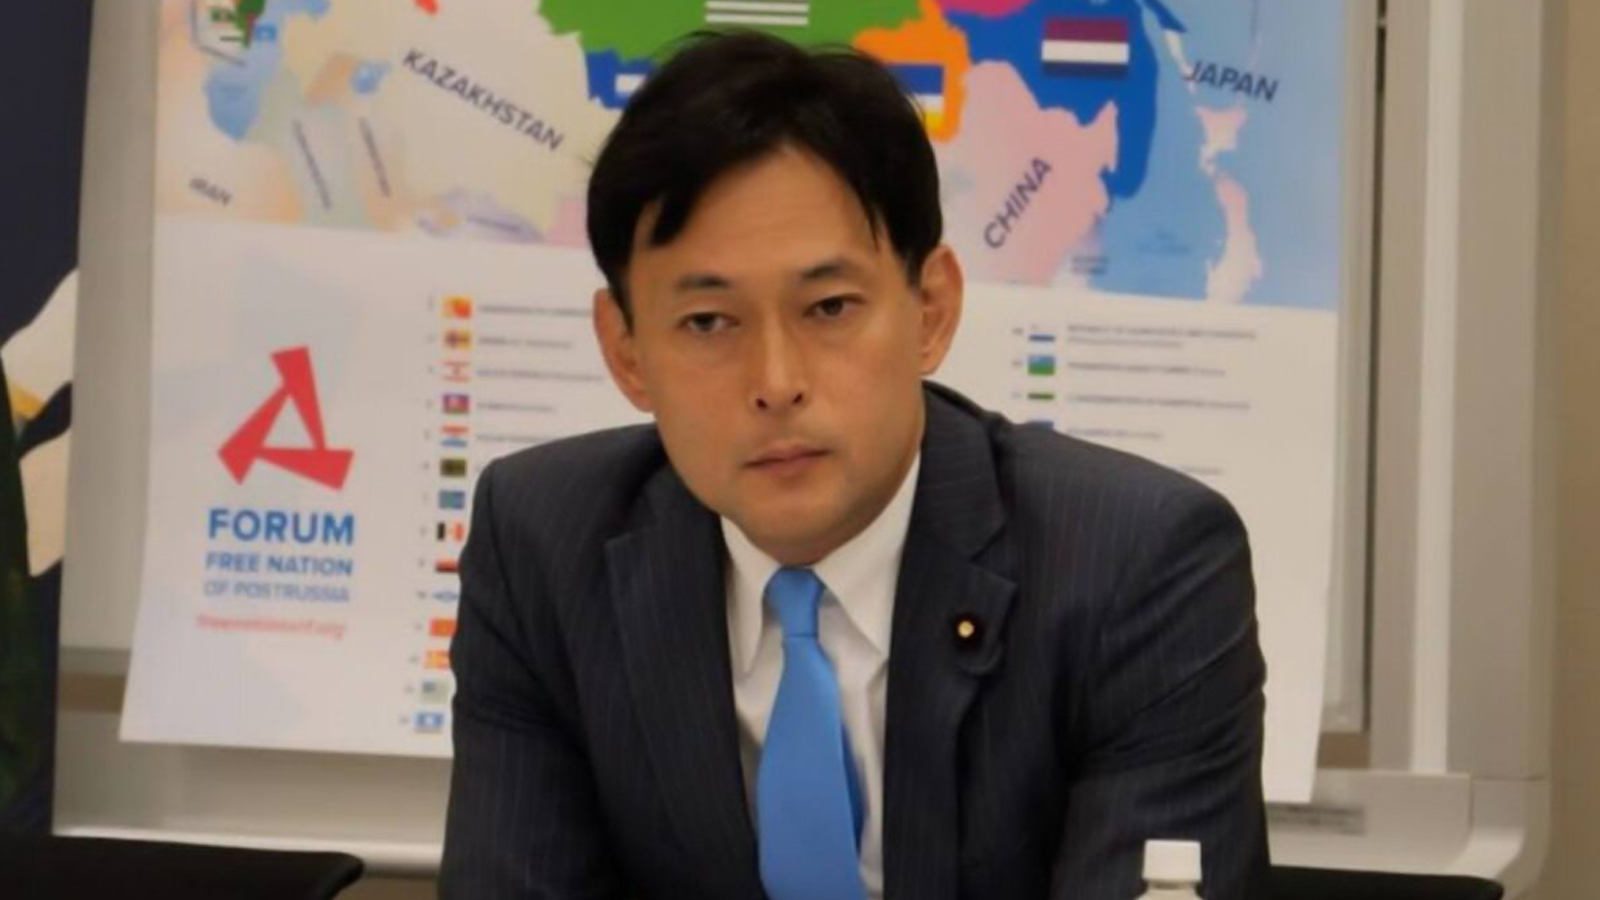 Japan will protect the interests of the indigenous peoples of the Russian Federation, because part of Japan is also occupied by the Russian Federation